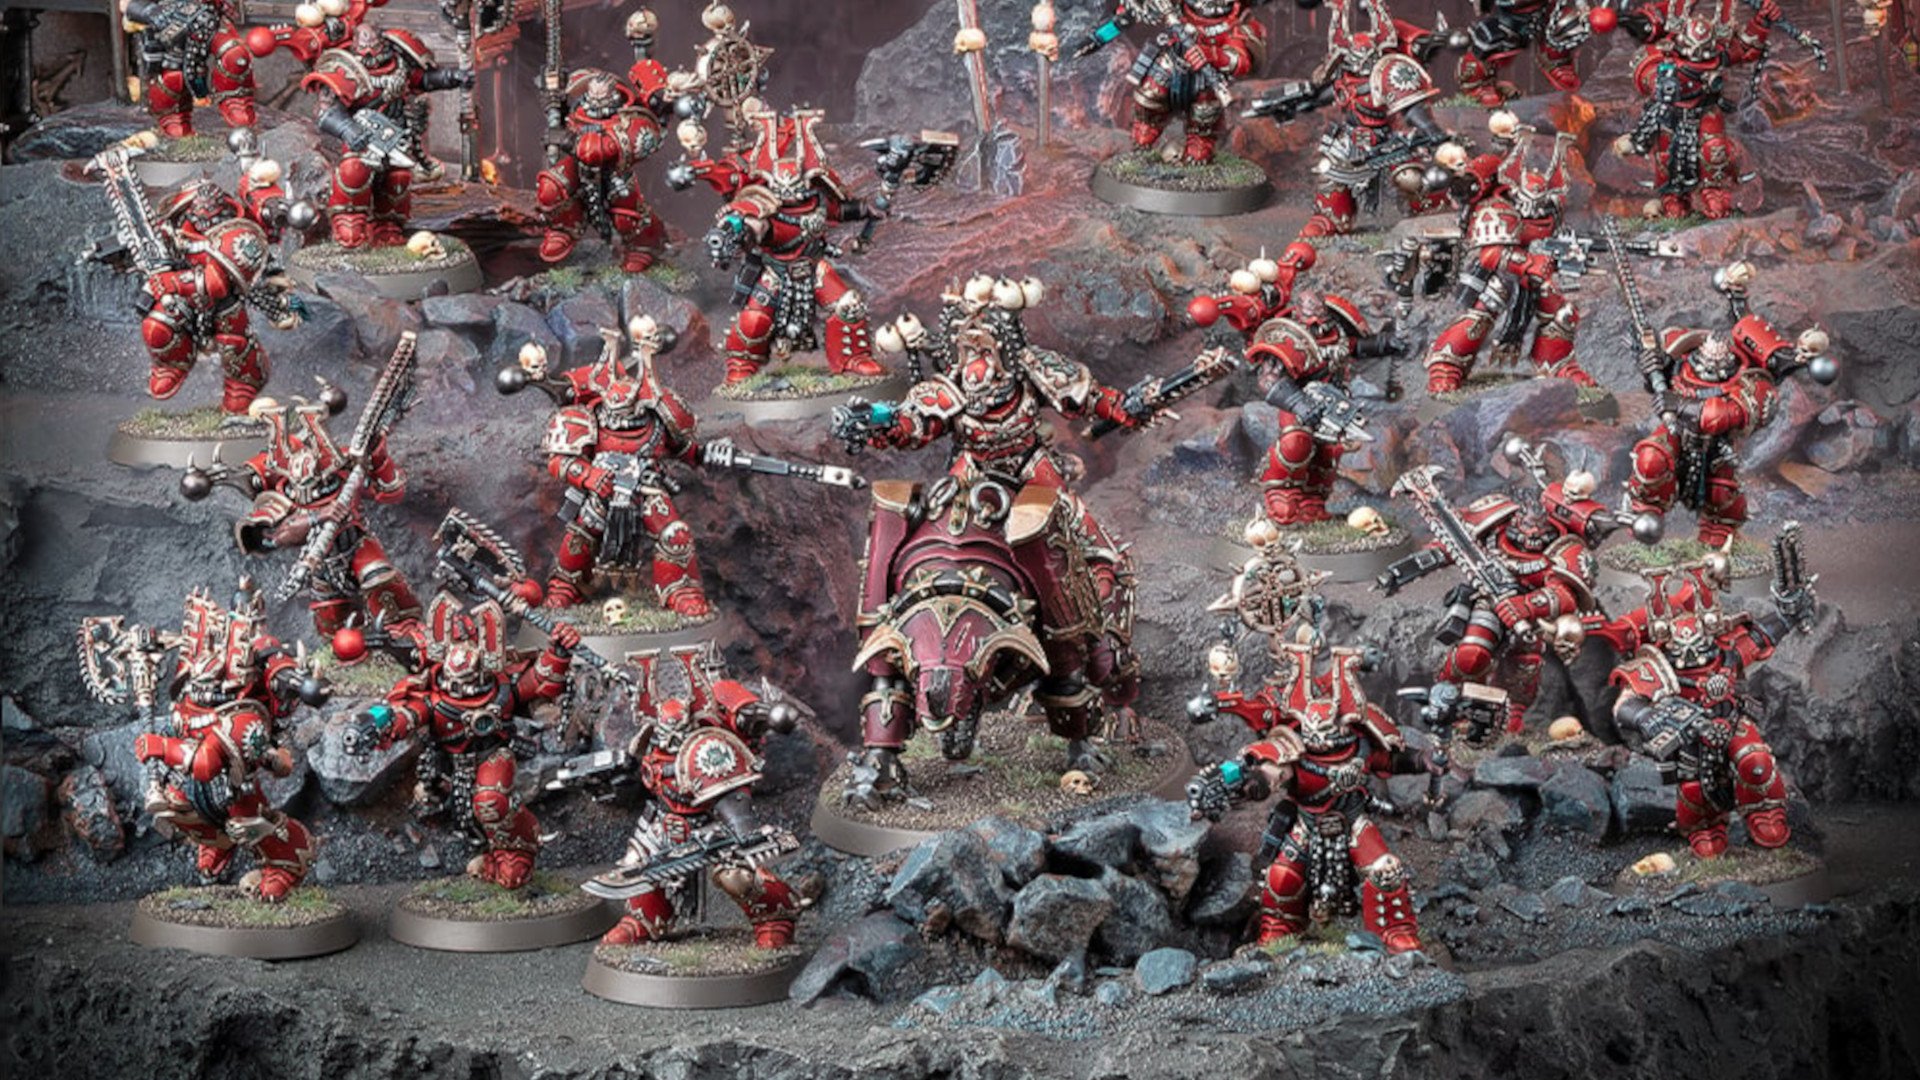 Warhammer 40k World Eaters Codex Review - combat patrol photograph by Games Workshop, a horde of red-armoured warriors led by a lord on a daemonic rhino steed